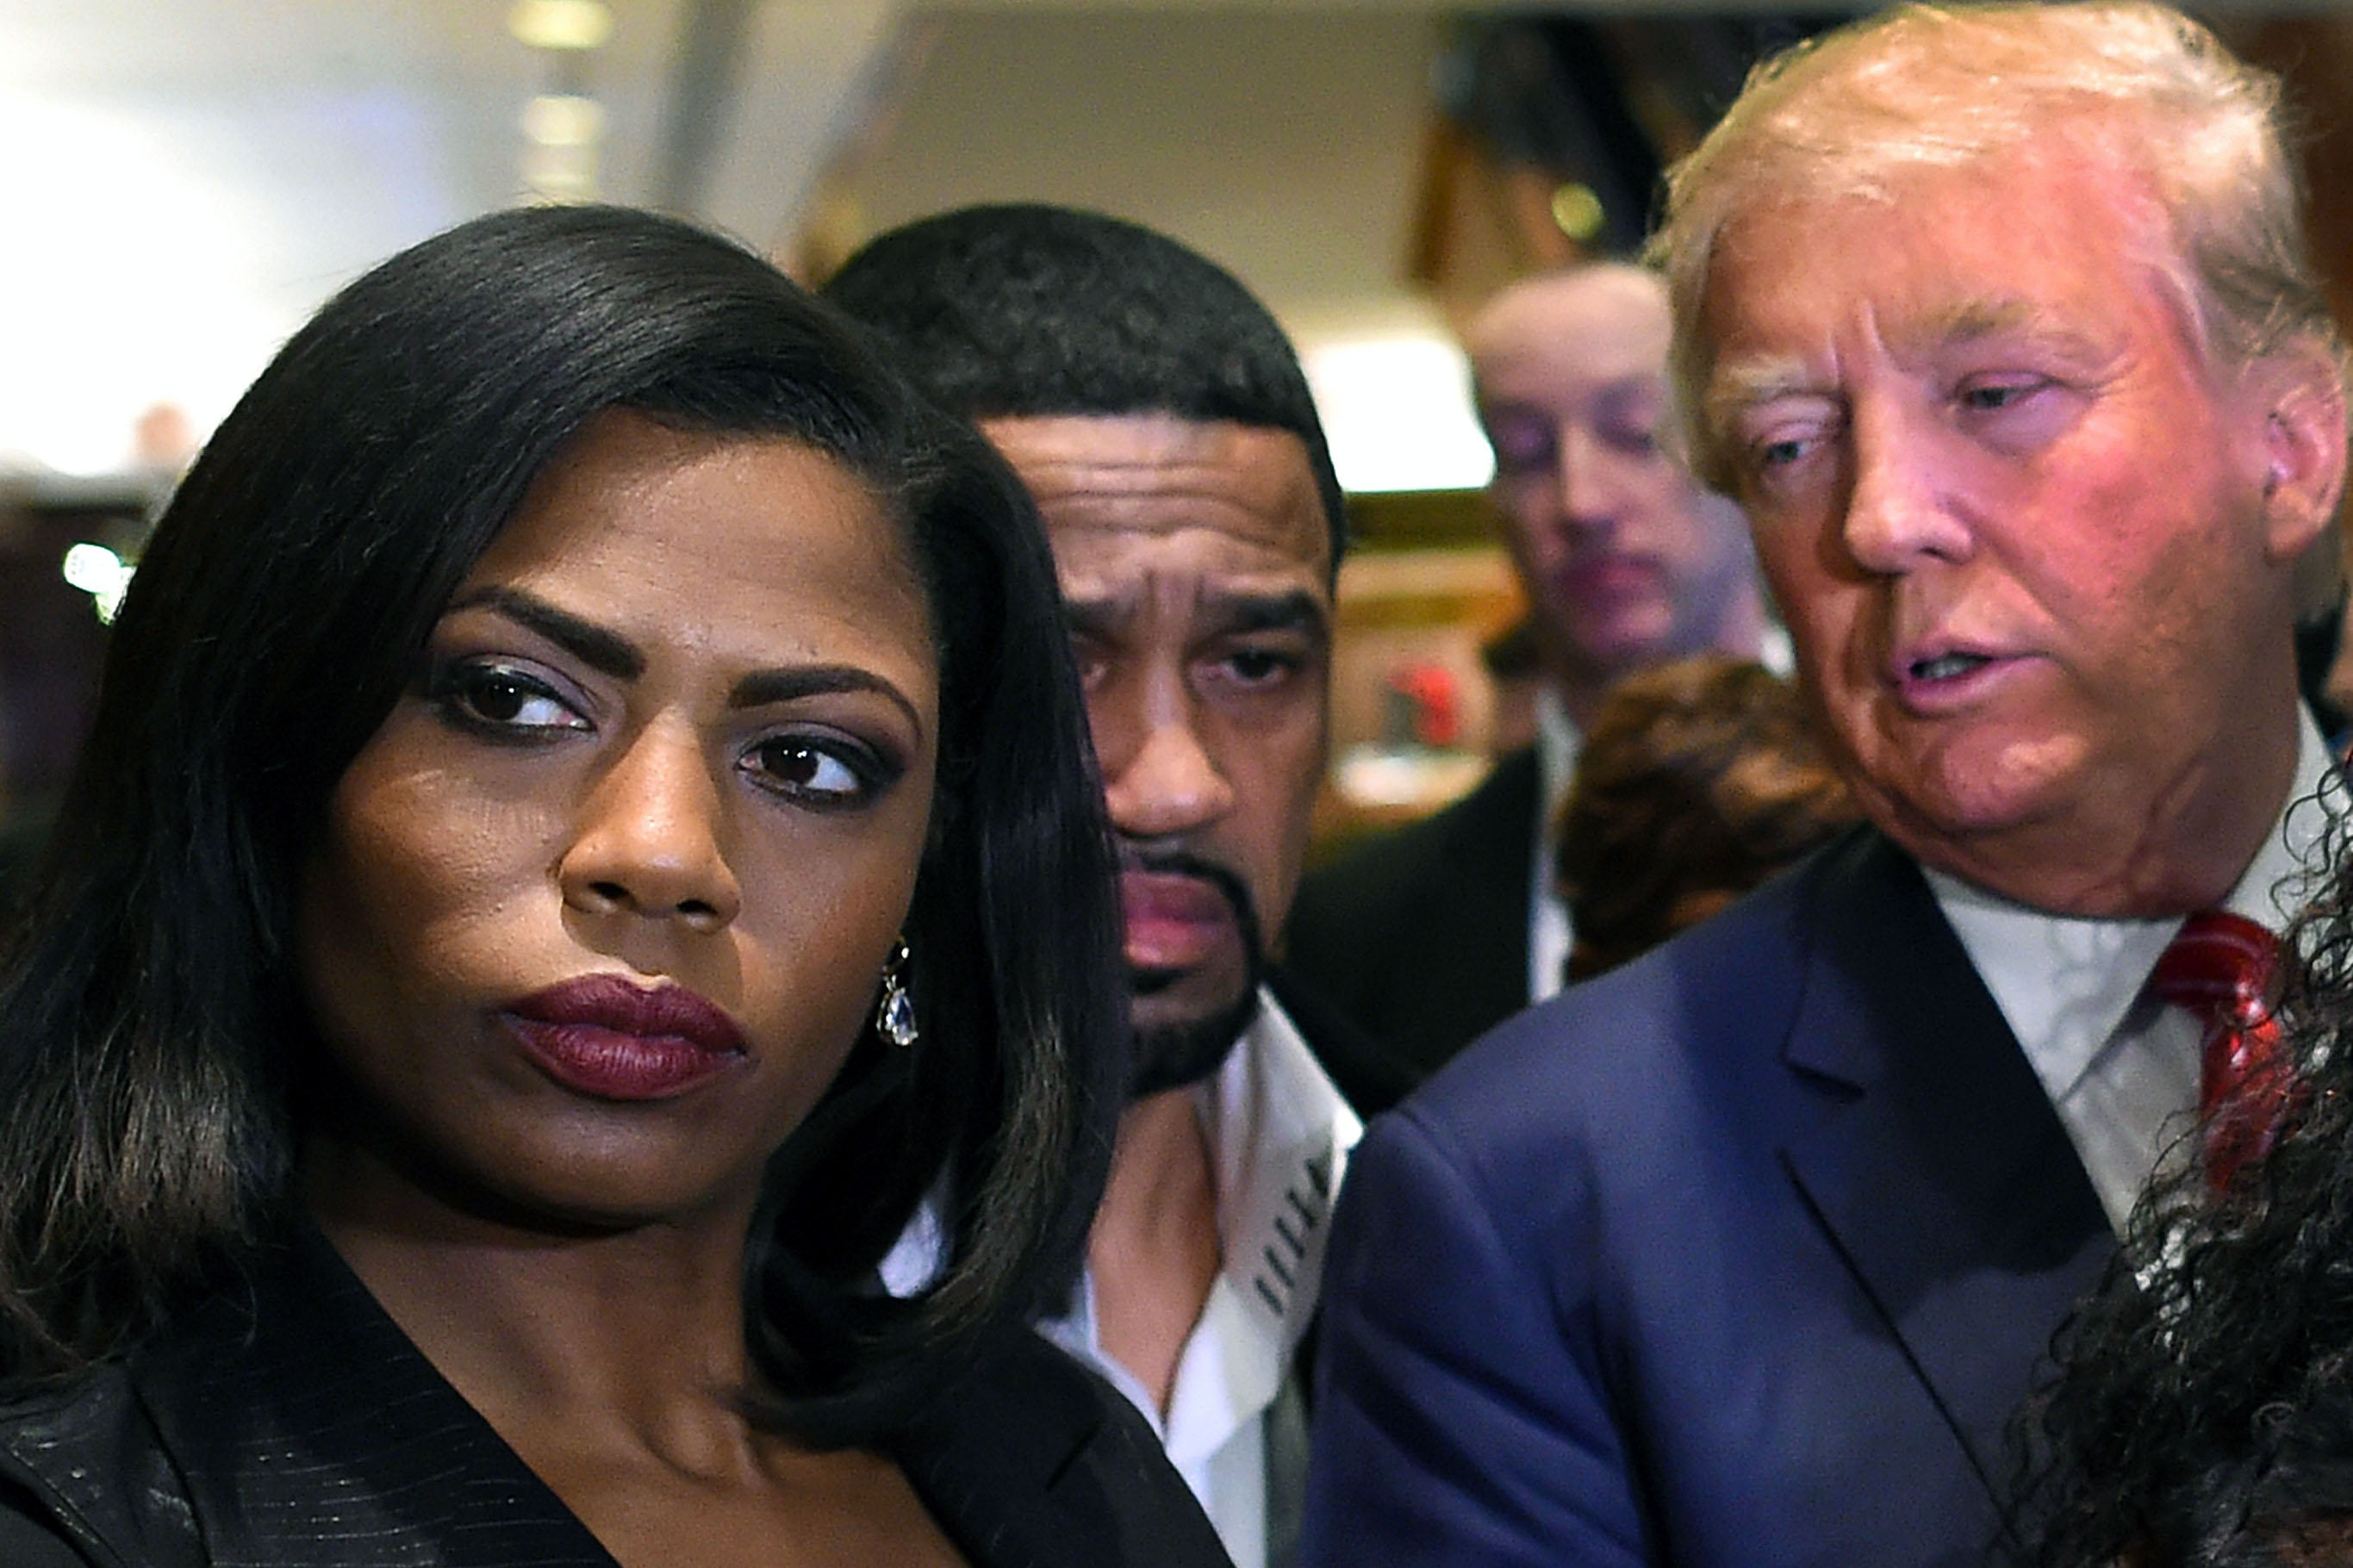 Omarosa Manigault, left, who was a contestant on the first season of Donald Trump's "The Apprentice" and is now an ordained minister, appears alongside Republican presidential candidate Donald Trump during a news conference on Nov. 30, 2015. (Timothy A. Clary—AFP/Getty Images)